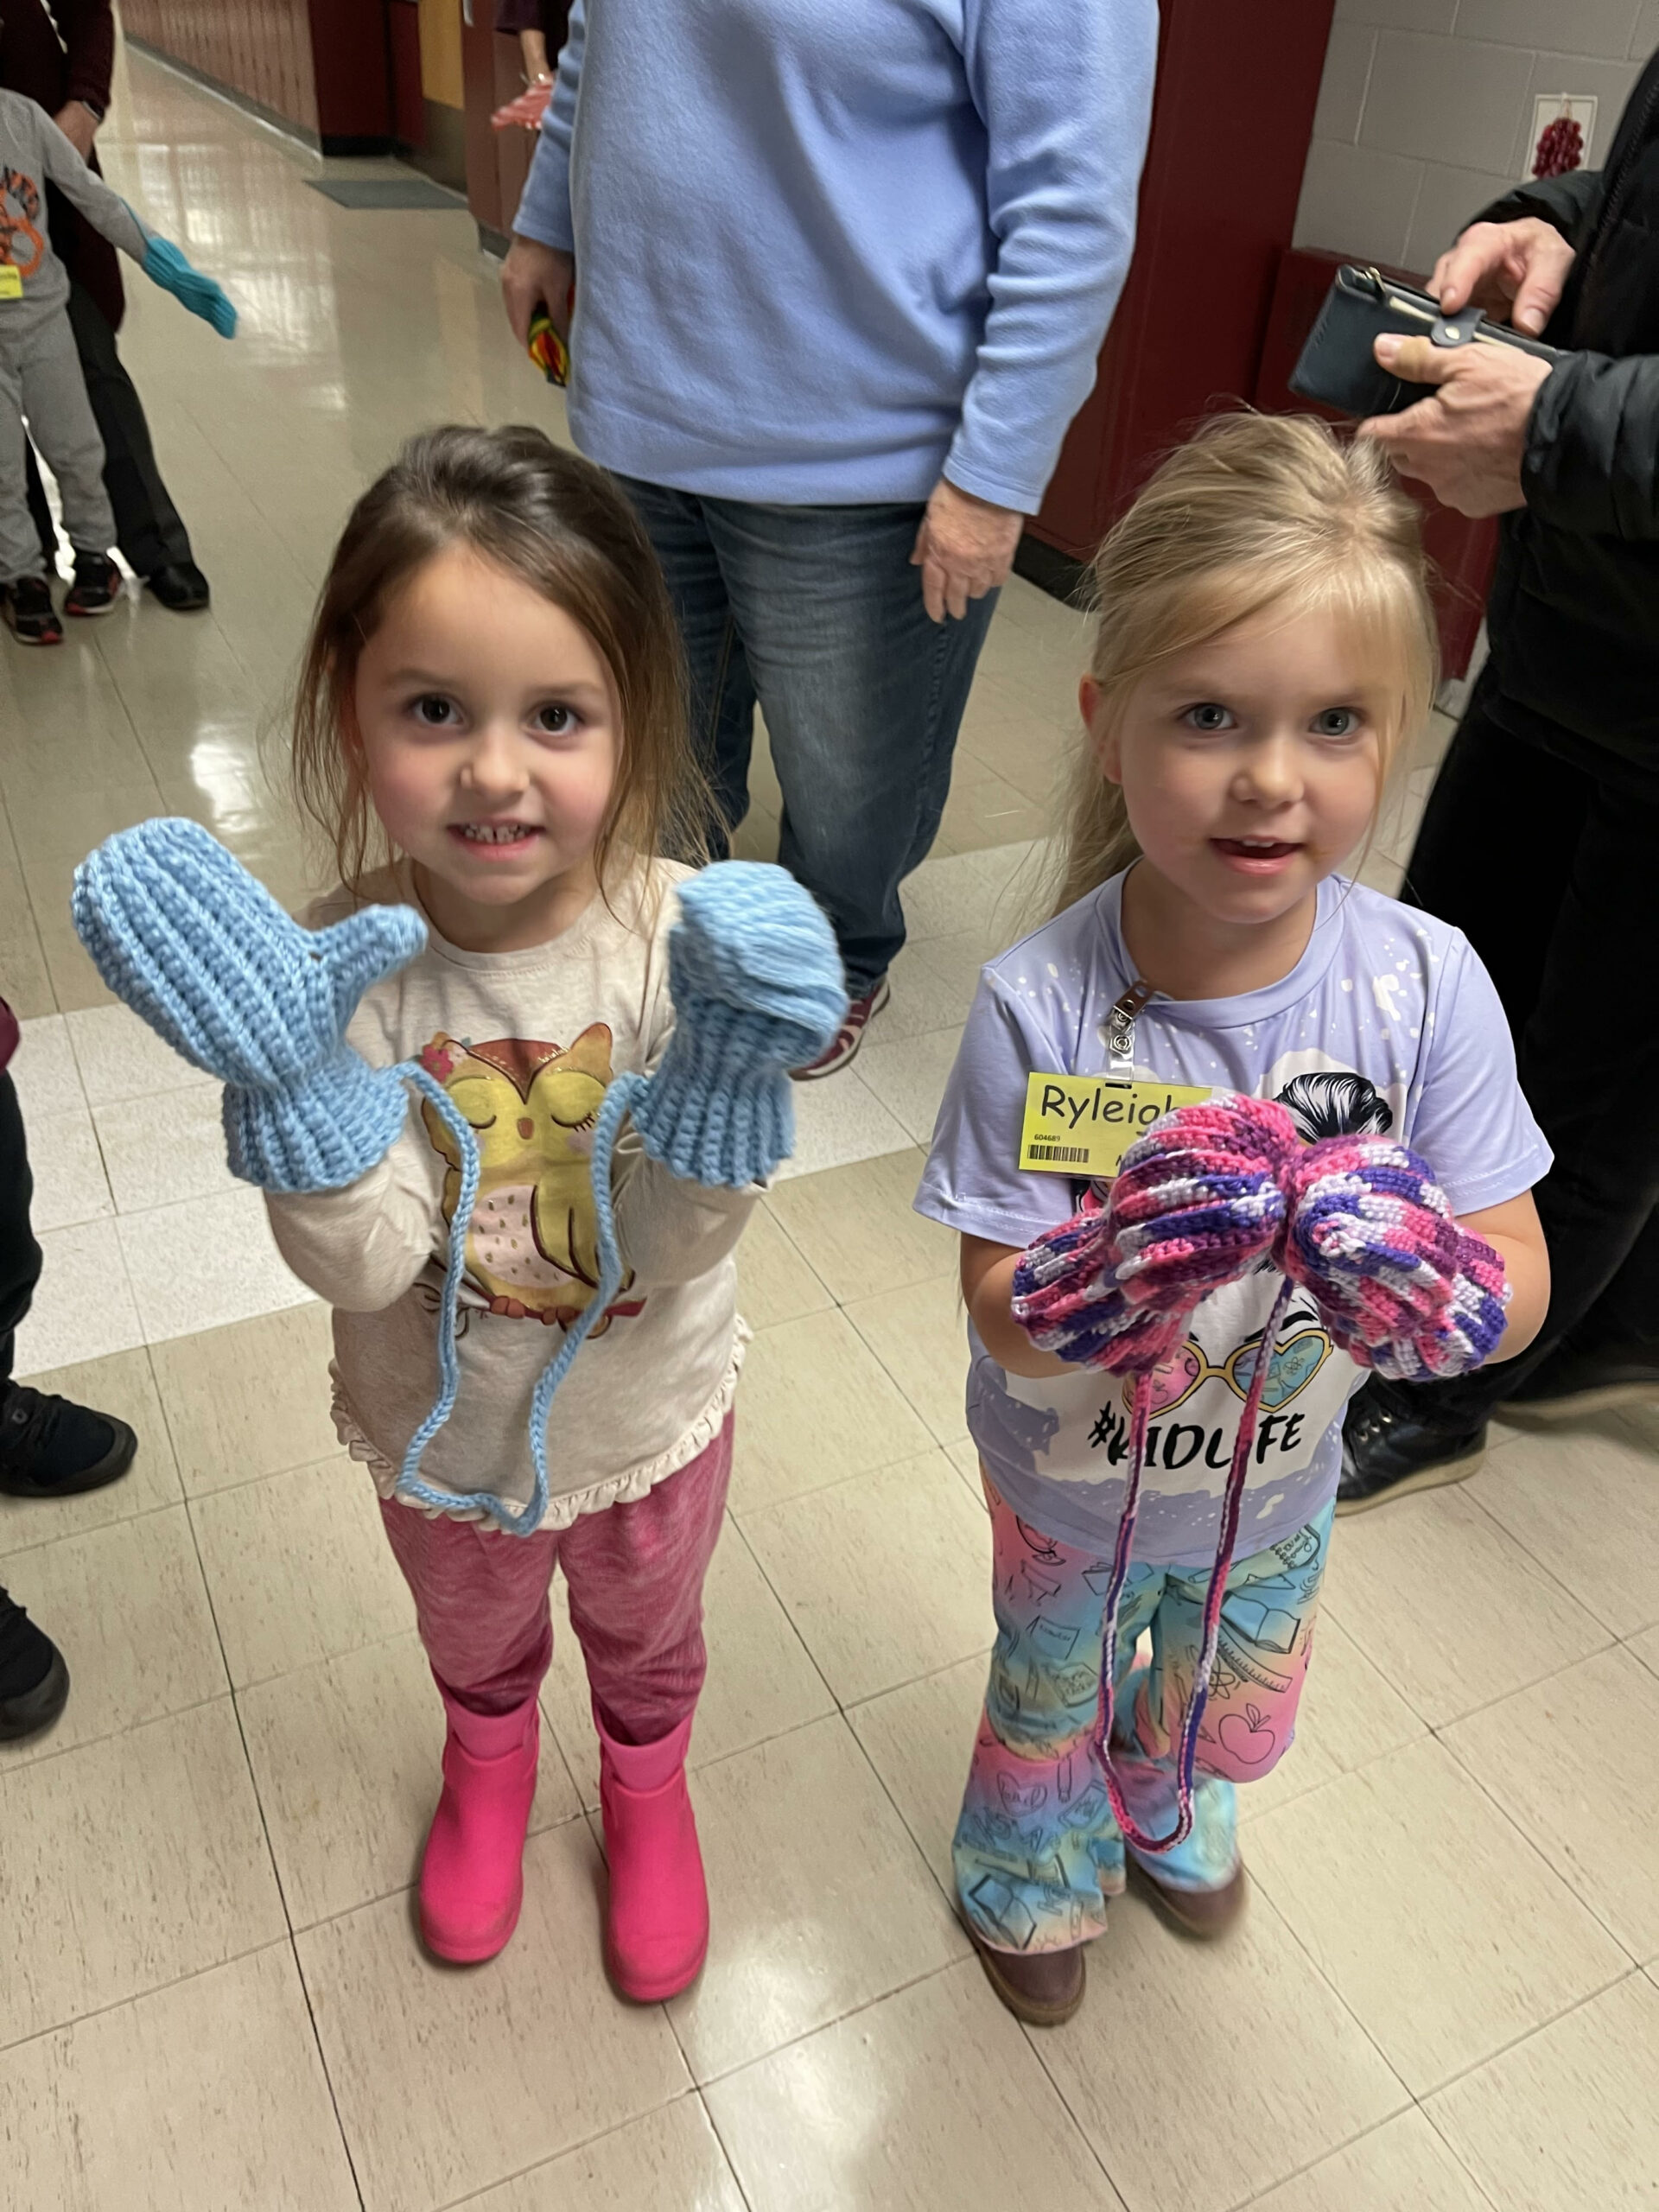 Pictures of preschool students receiving handmade mittens from the senior center